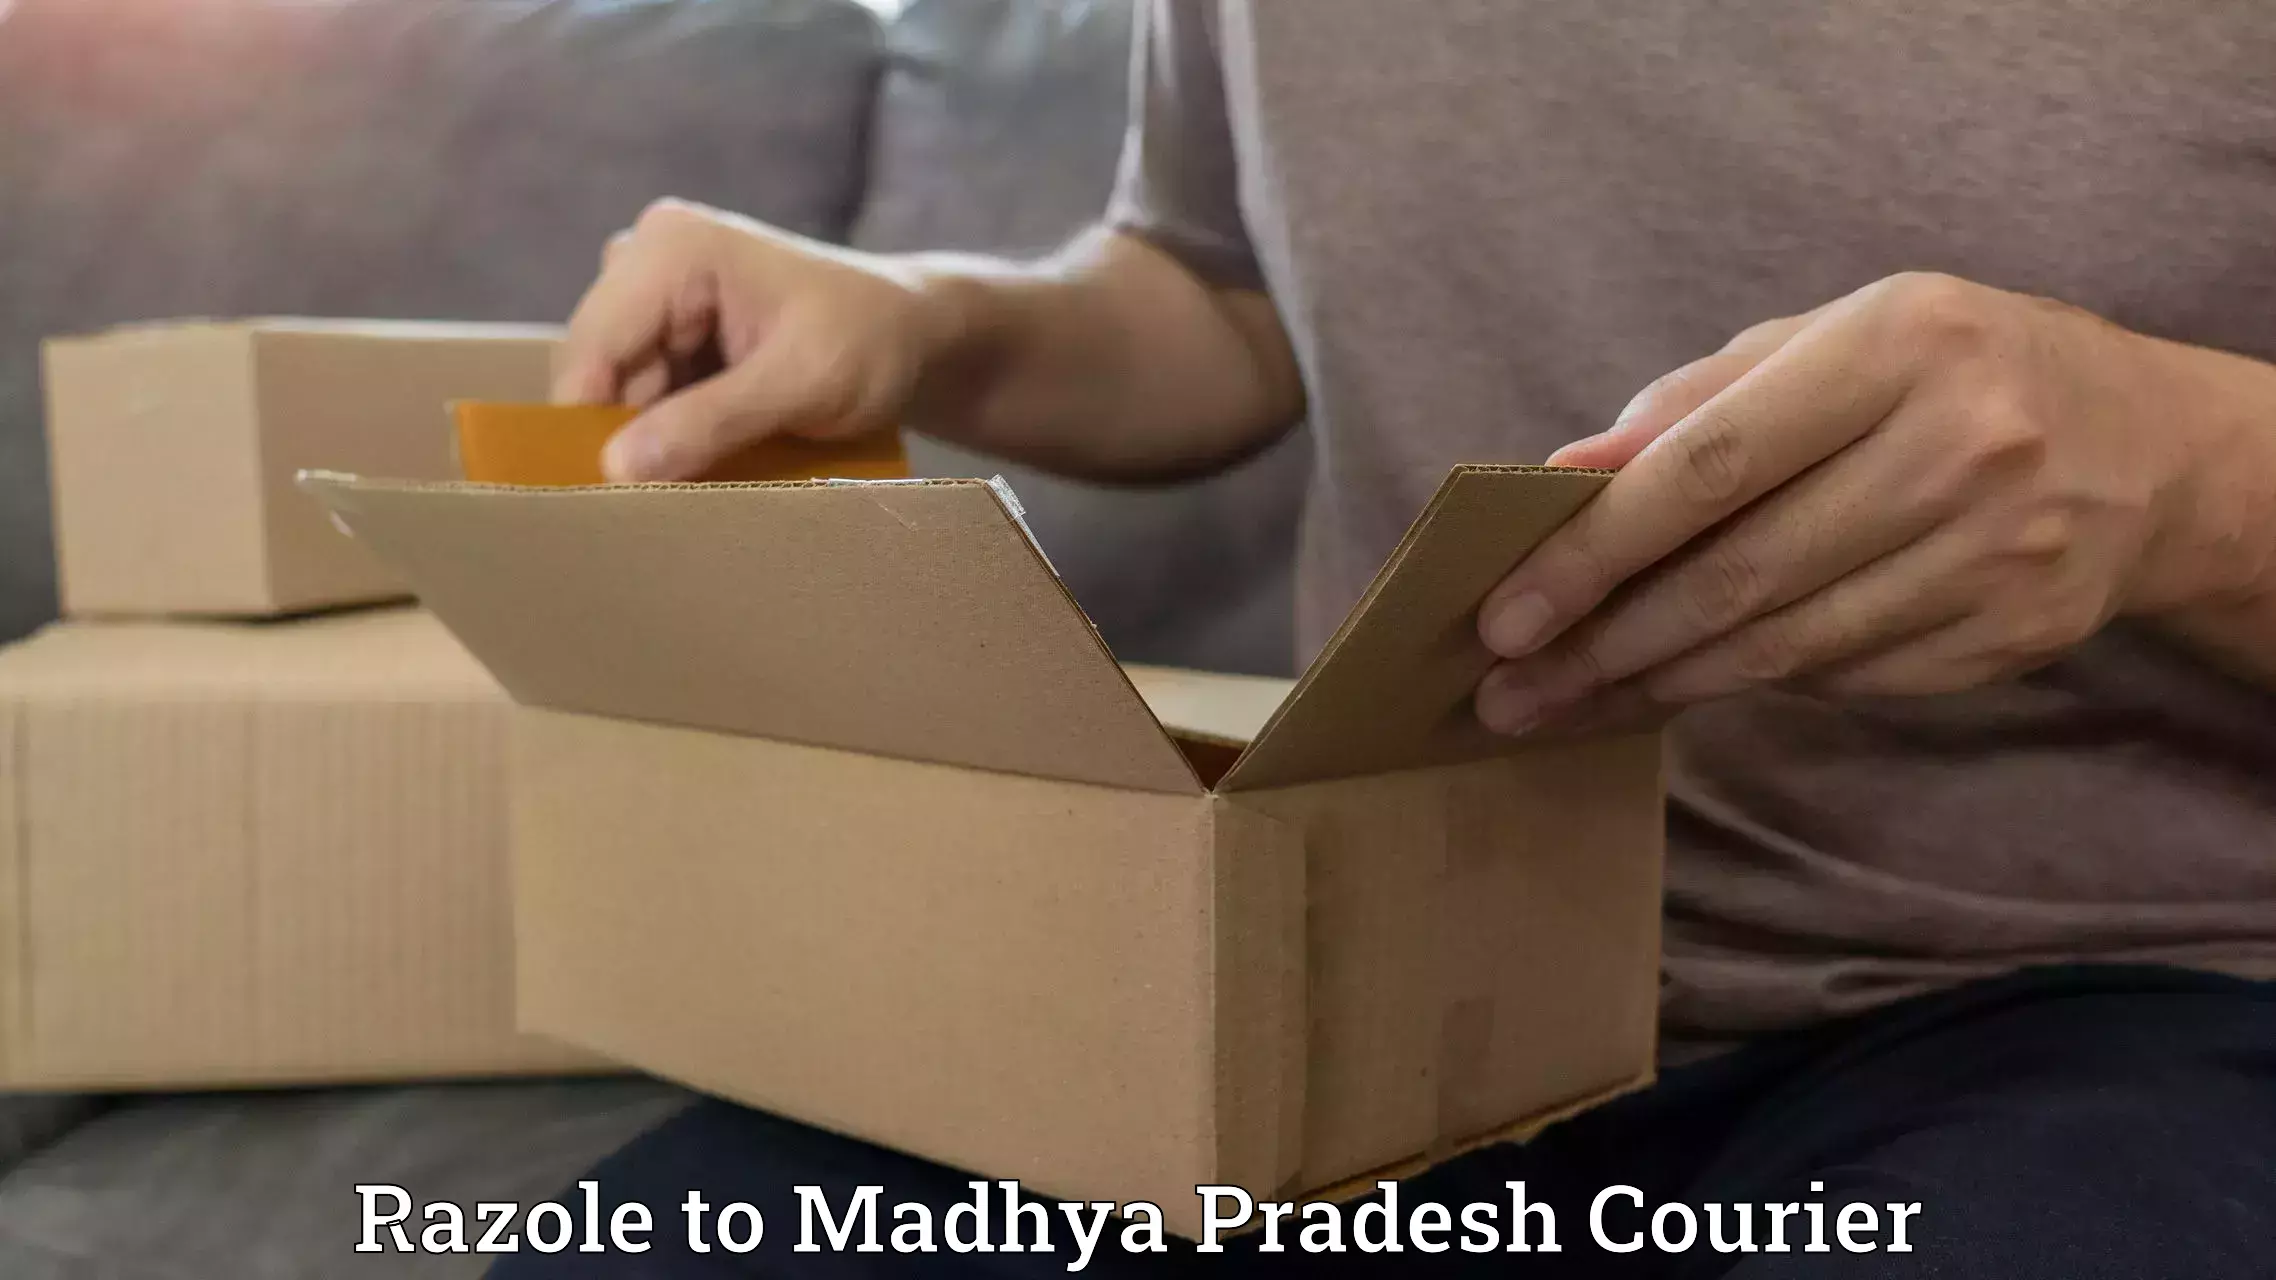 Full-service courier options Razole to Indore